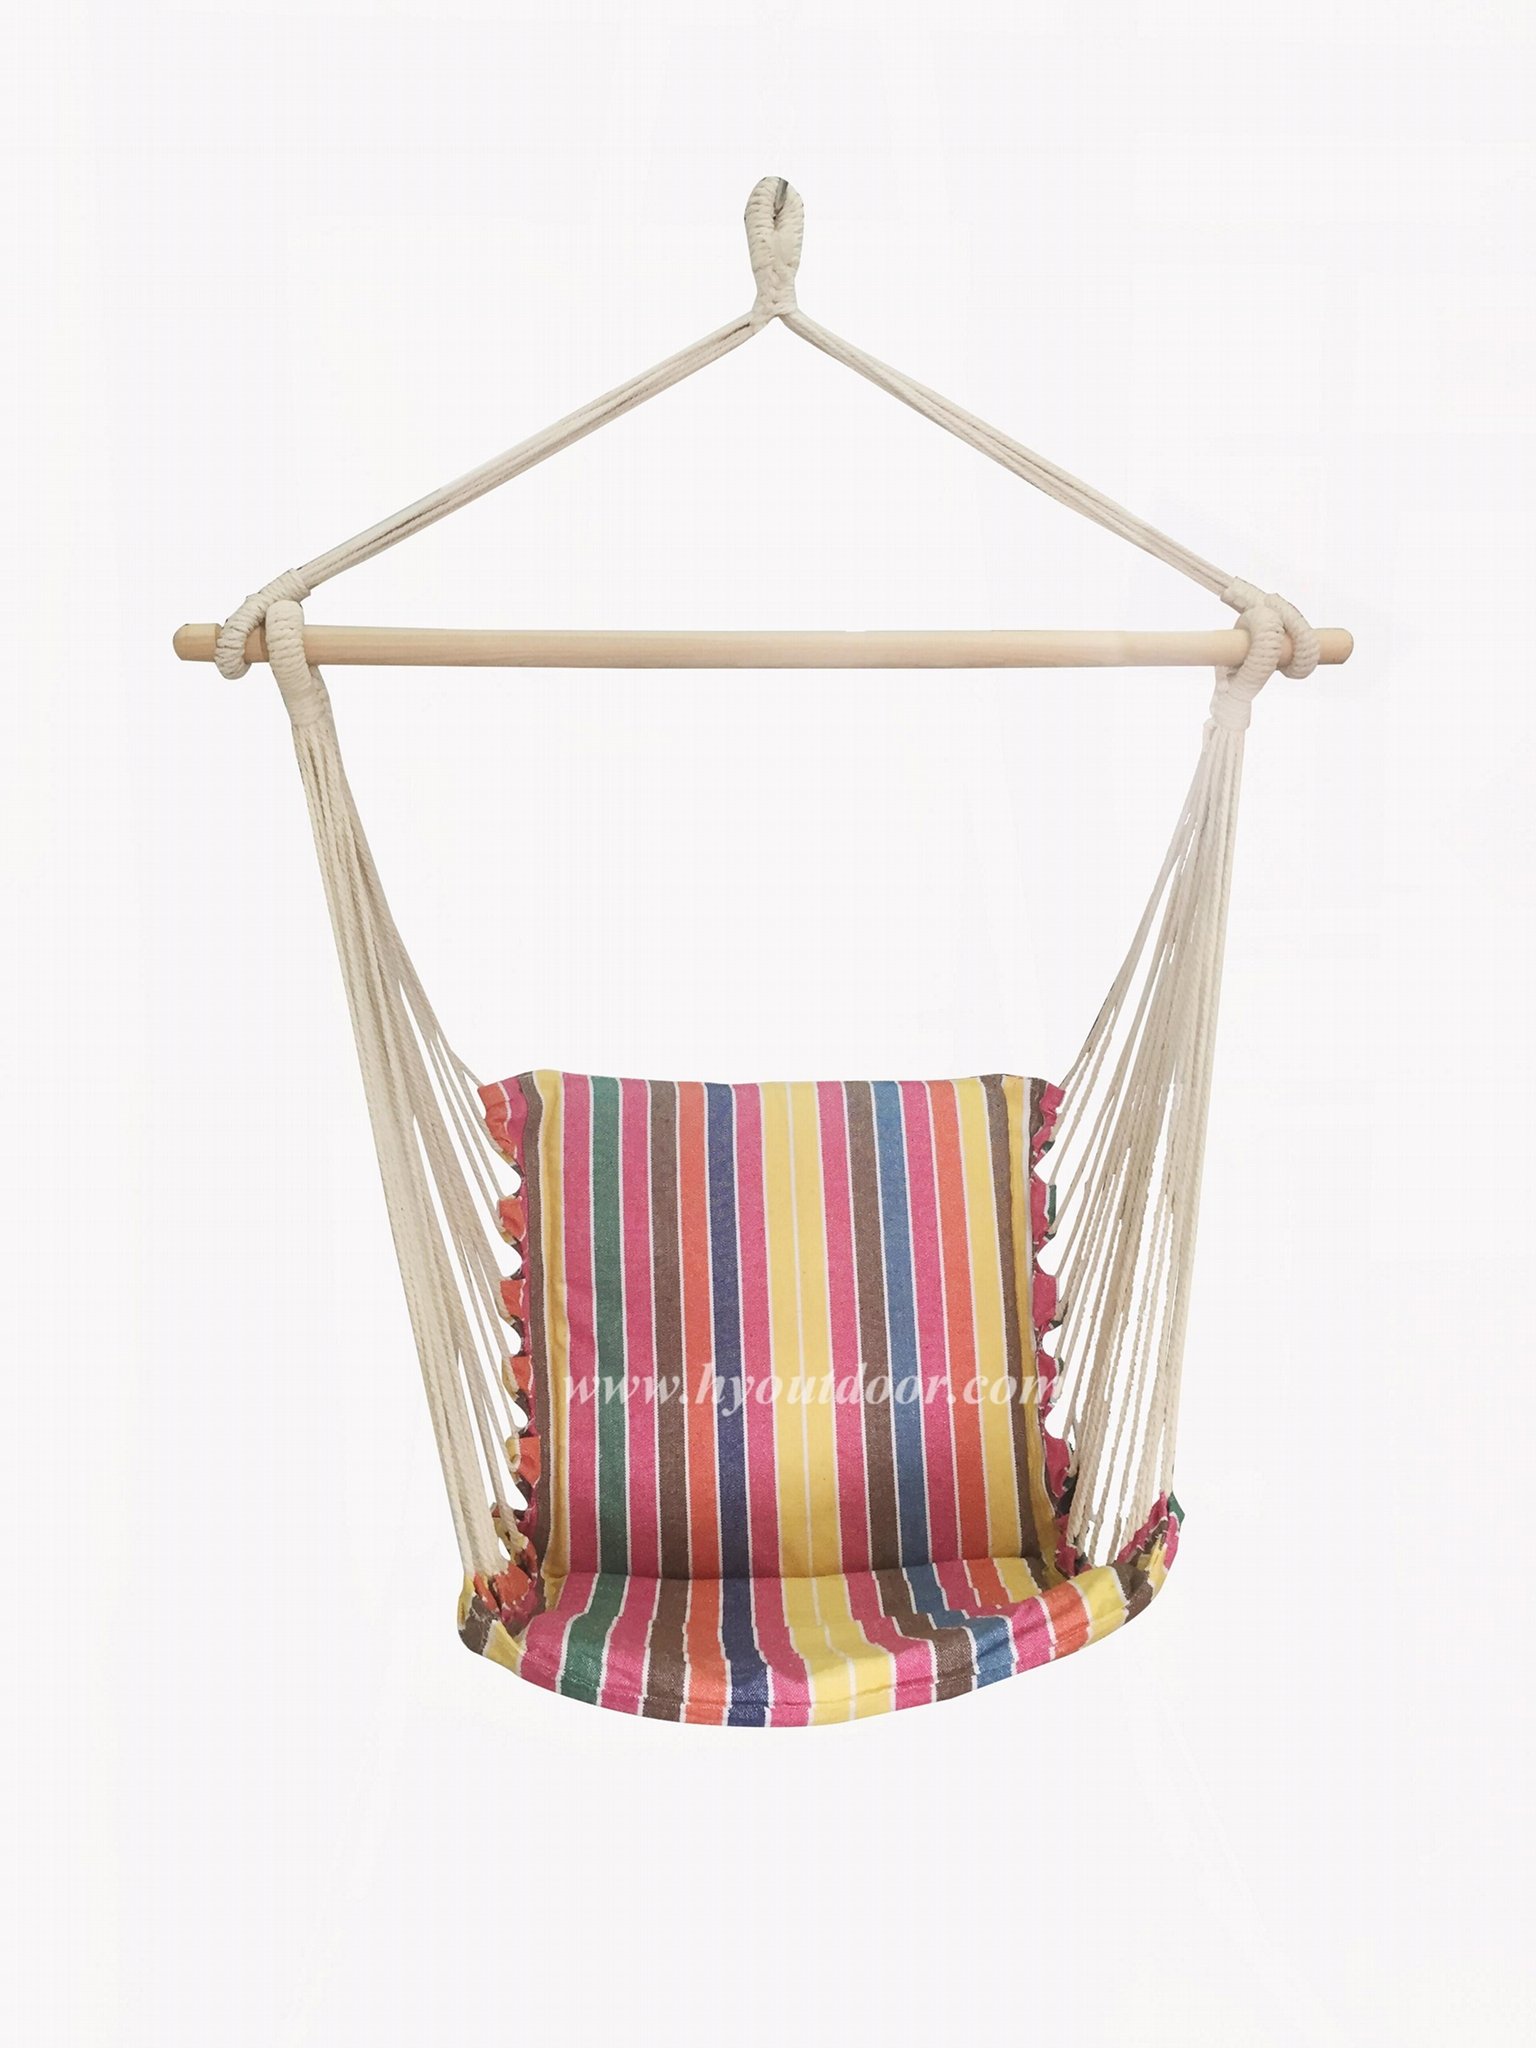 Hanging chair without armrest